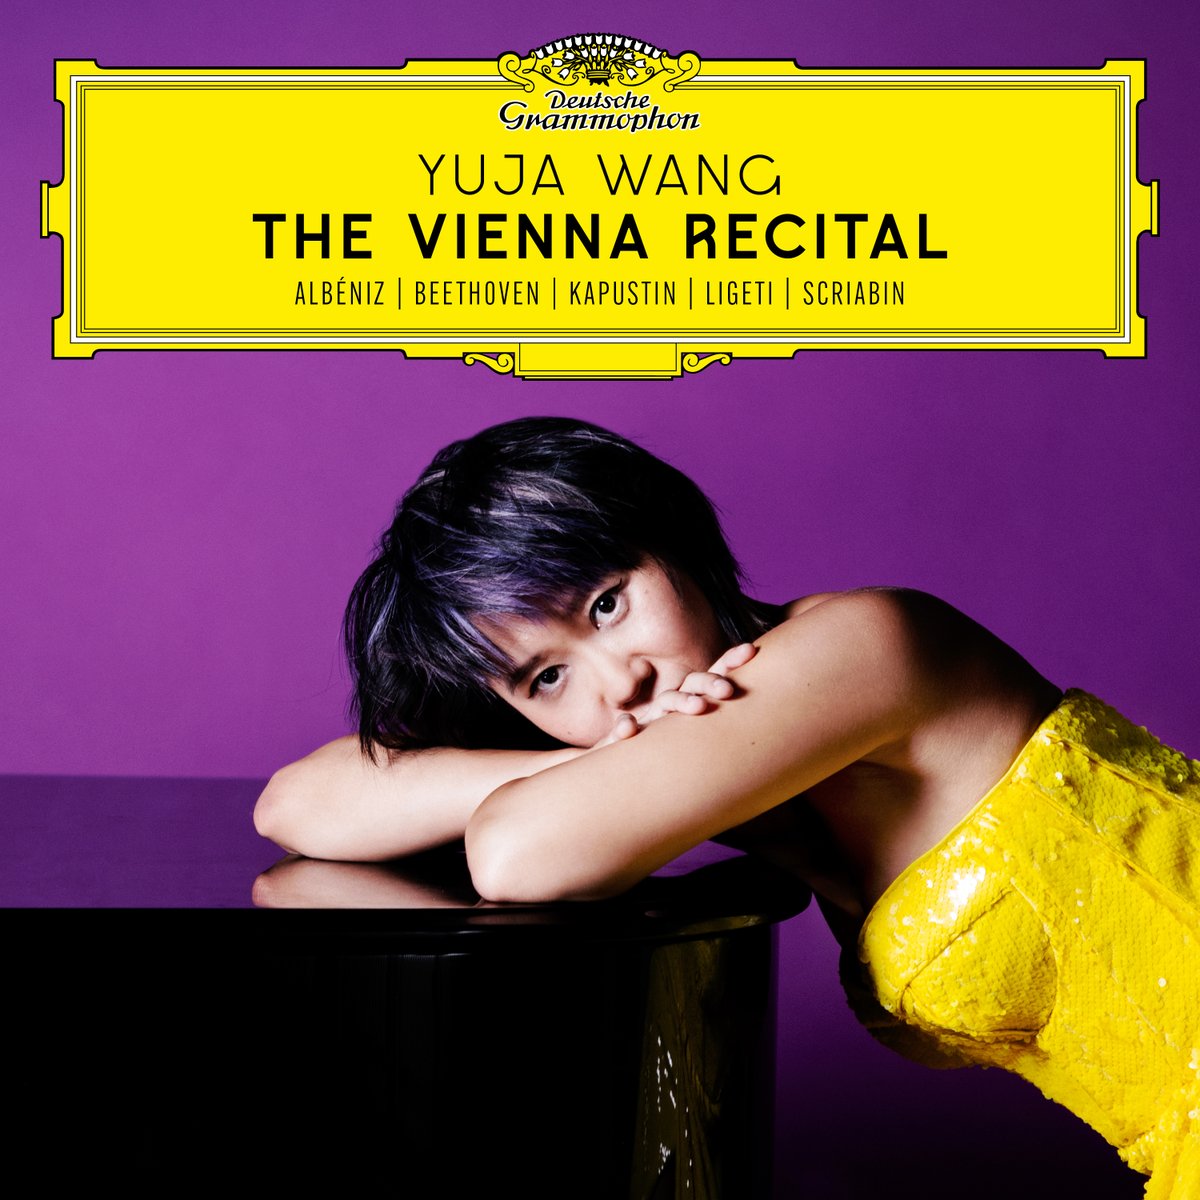 The Vienna Recital has been released on all major streaming platforms and in our DG Shop 🤩 @YujaWang’s brand new DG recording features works by Beethoven, Ligeti, Scriabin and more. Discover it now: dgt.link/Wang-ViennaRec…